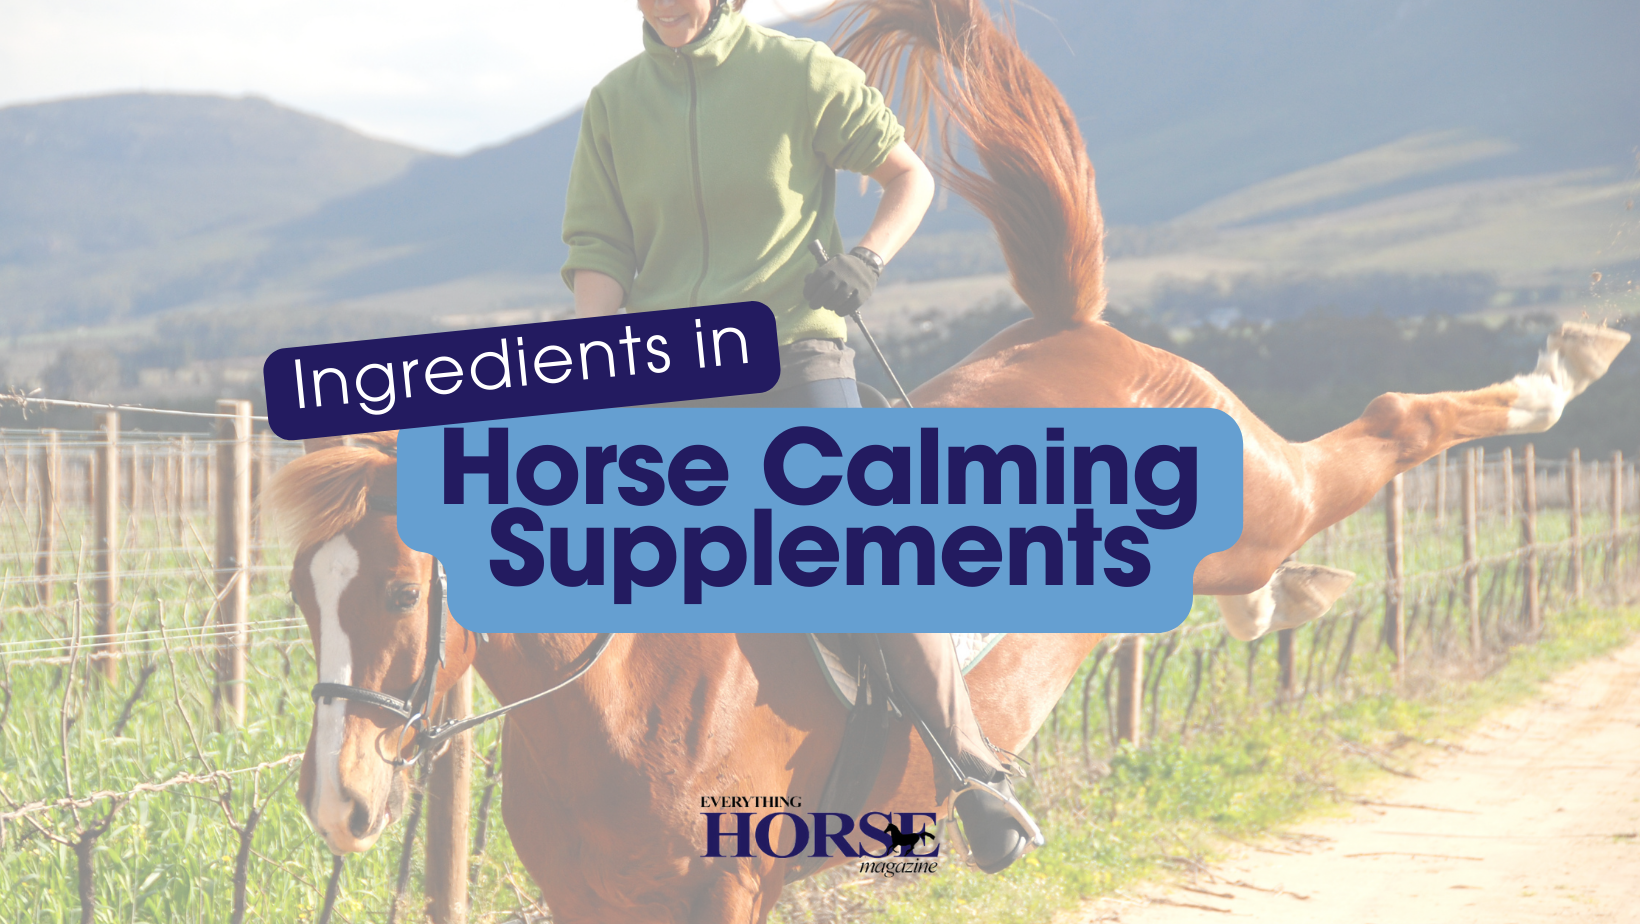 ingredients in horse calming supplements. Image of a horse kicking out his back legs with a rider in the saddle.